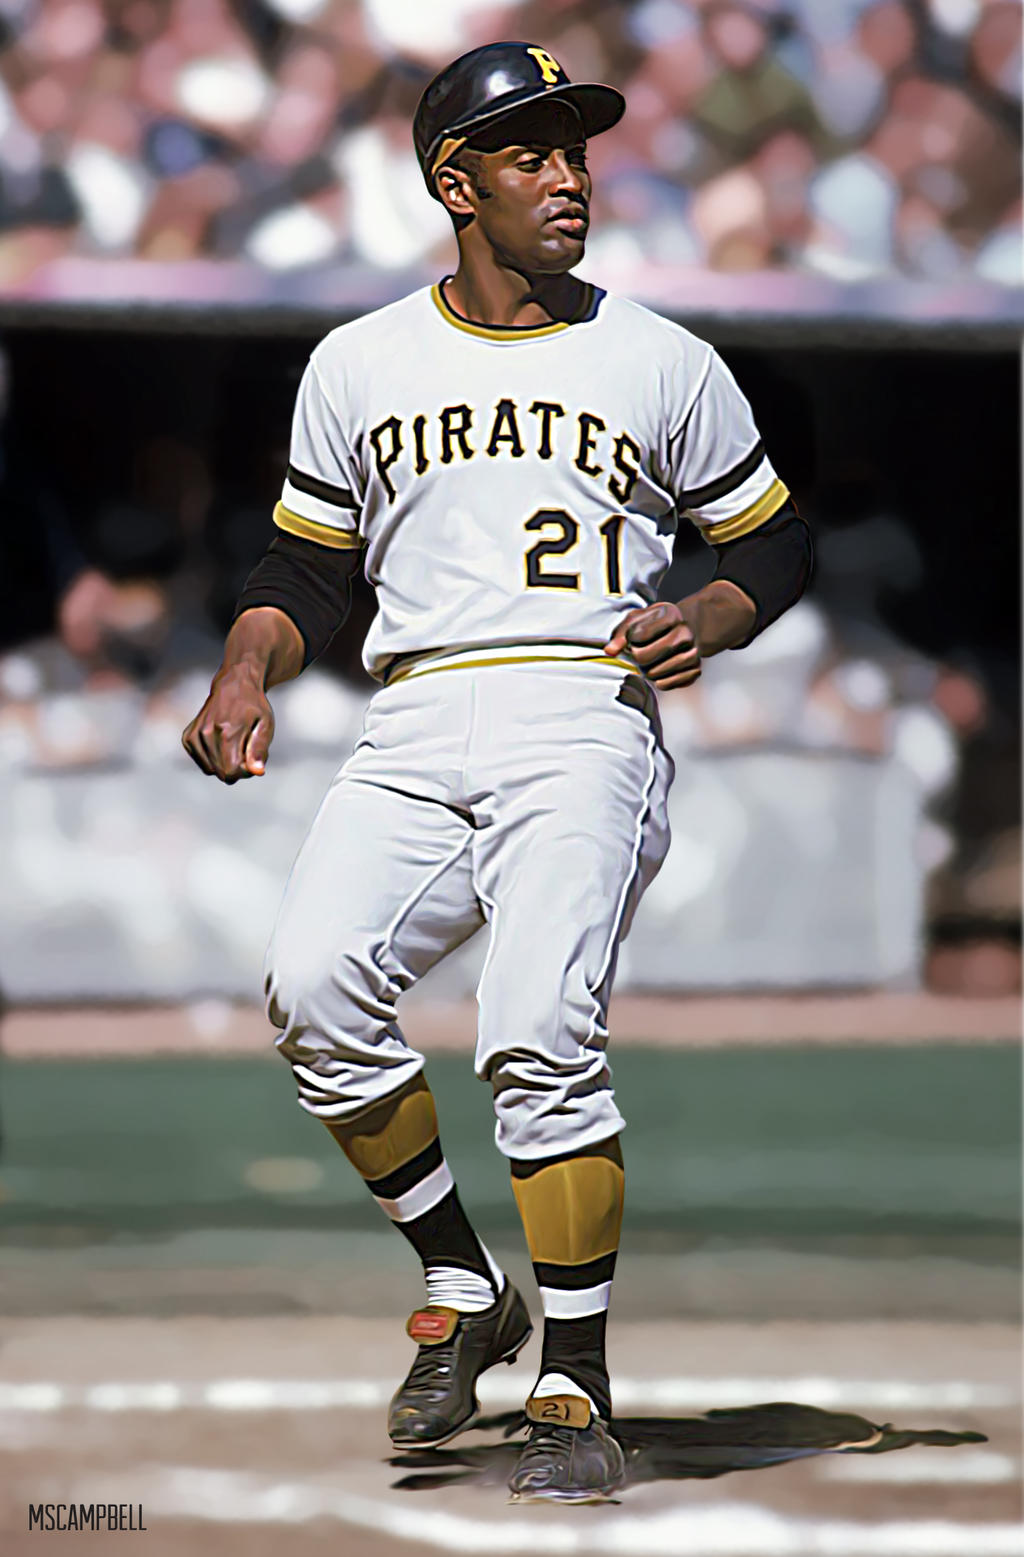 Roberto Clemente - Pittsburgh Pirates by MSCampbell on DeviantArt